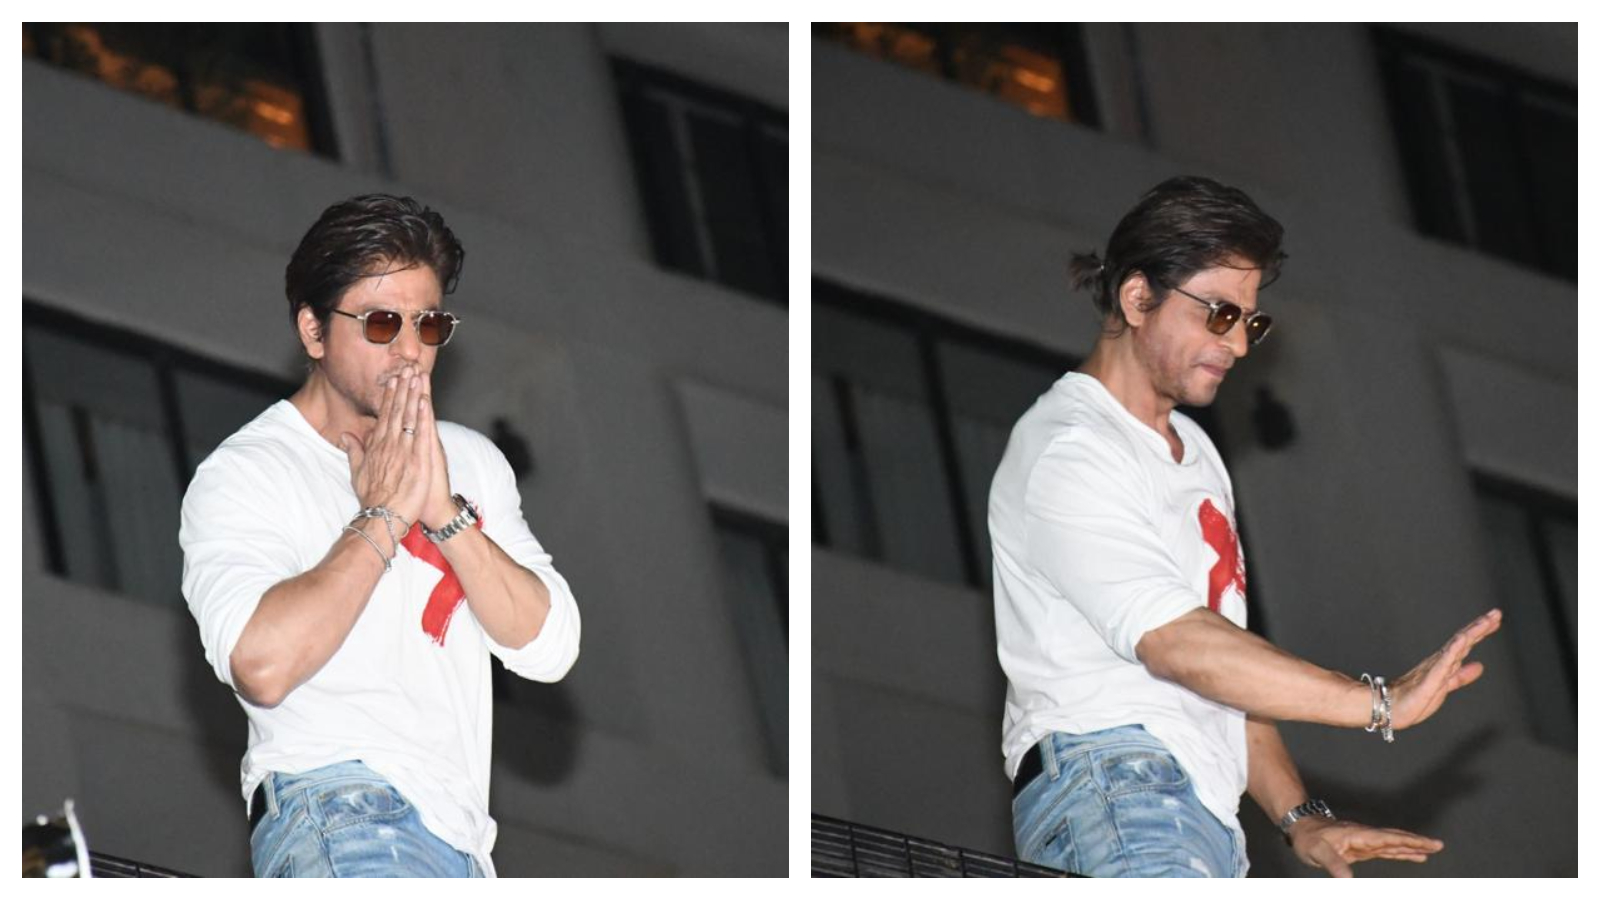 Shah Rukh Khan's total wardrobe for a recent fan event cost close